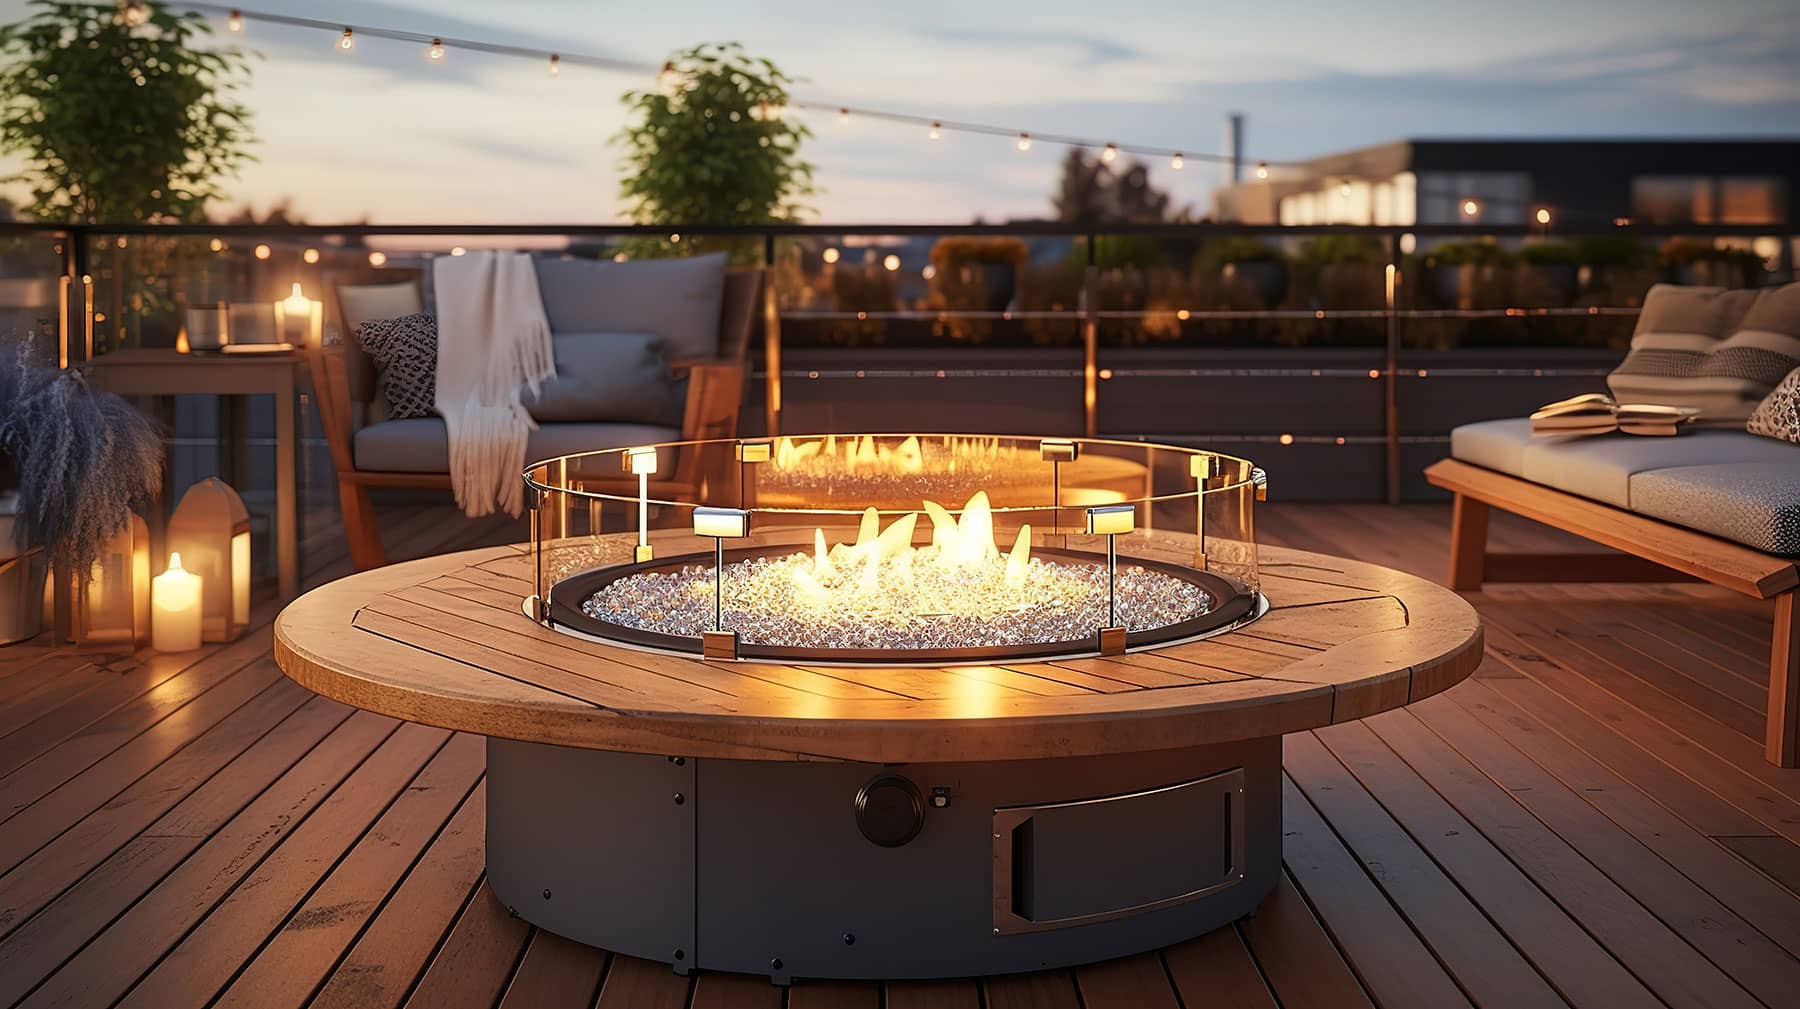 What Color Glass Looks Best In Fire Pit?